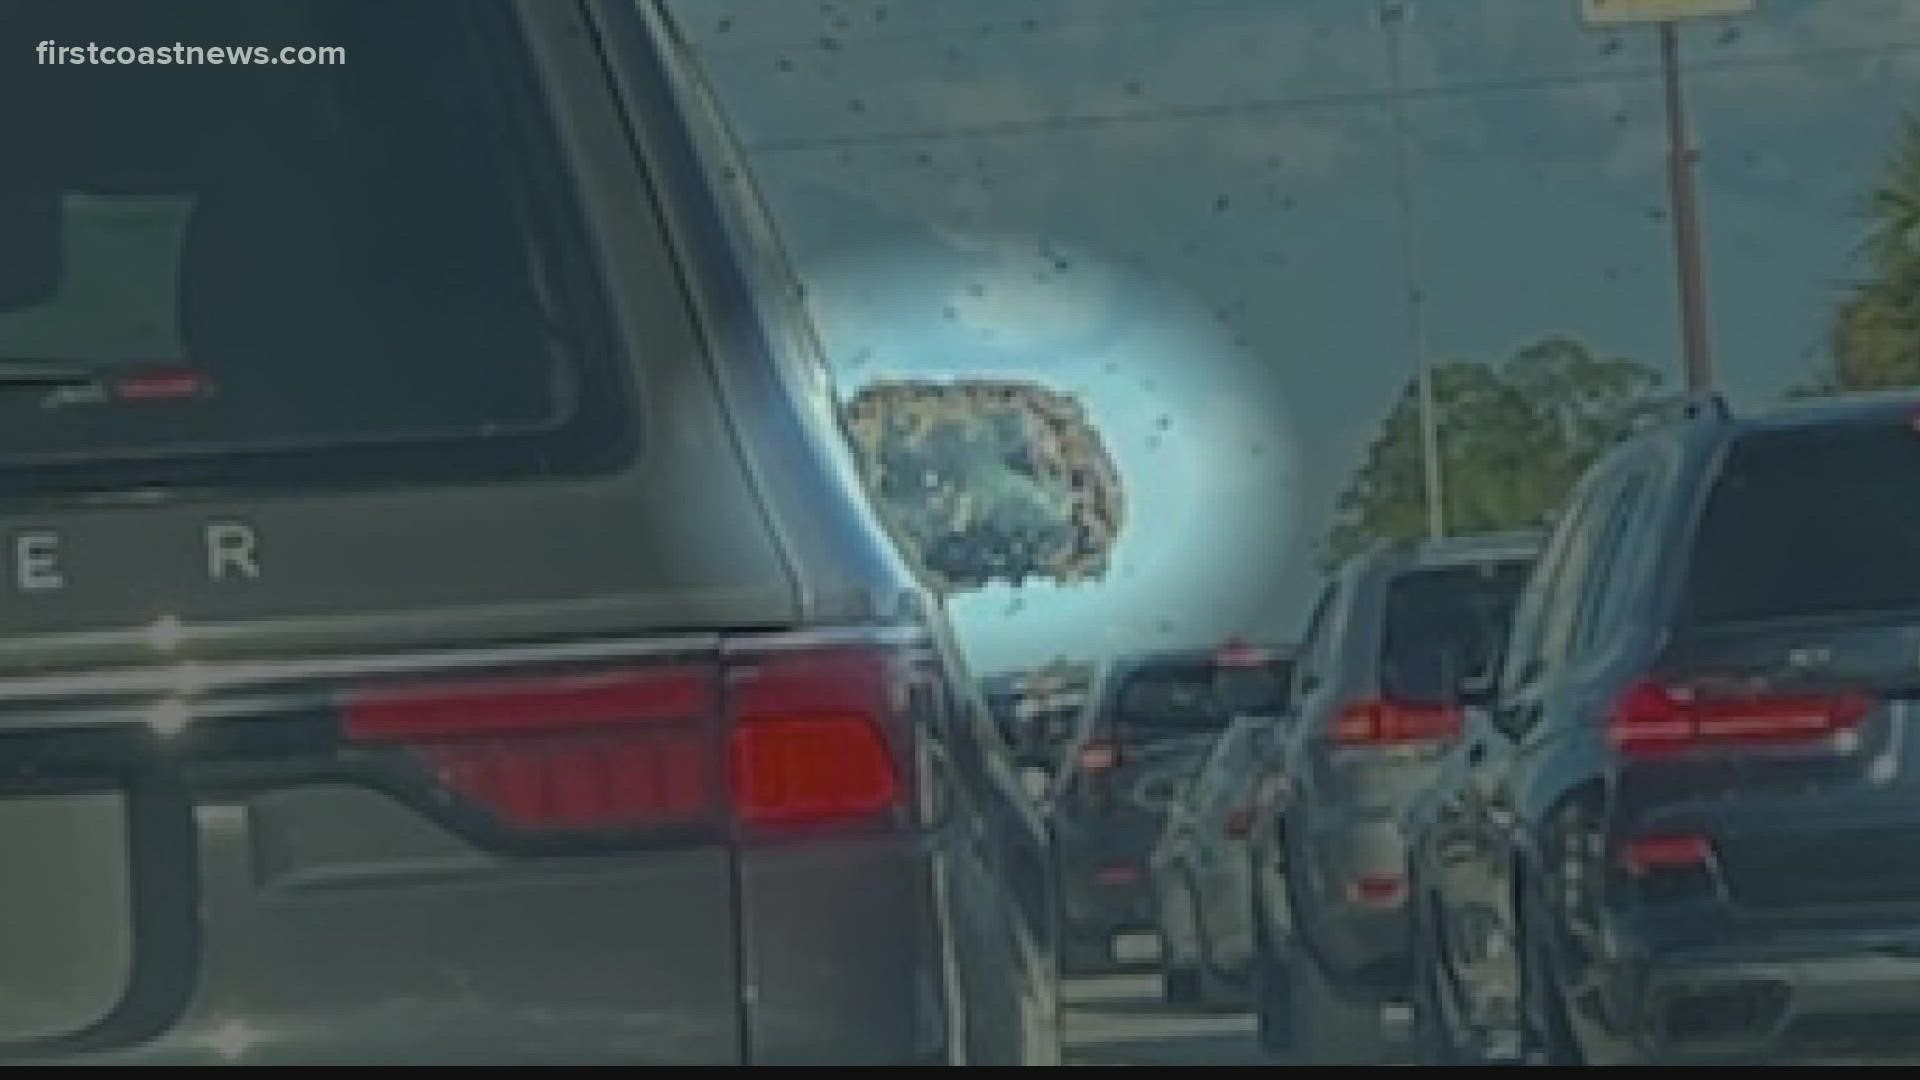 An eyewitness tells First Coast News that it appears a truck transporting bee hives is involved, however, this has not been confirmed by officials.